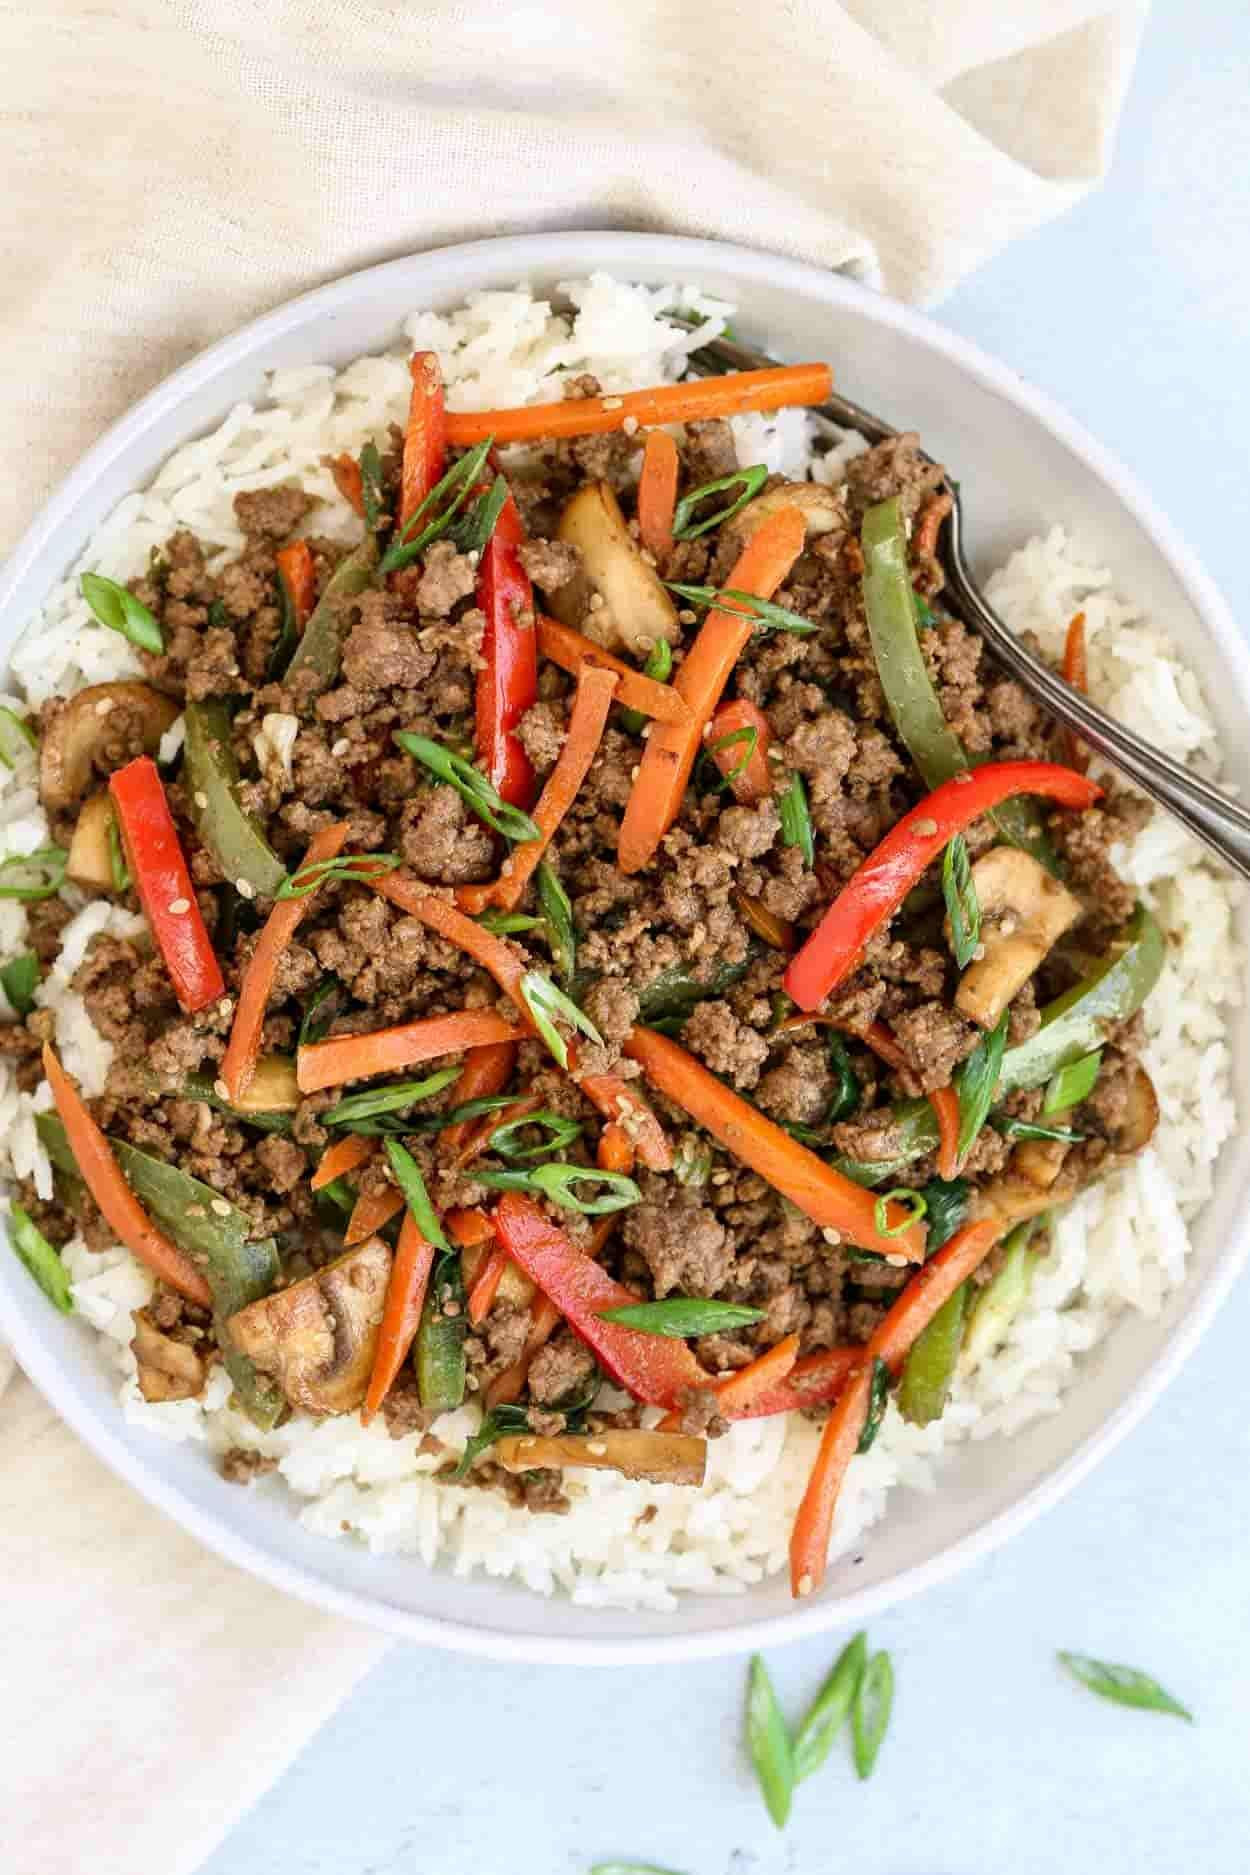 Ground Beef And Vegetable Stir Fry
 The best recipe for beef stir fry Ground beef sautéed